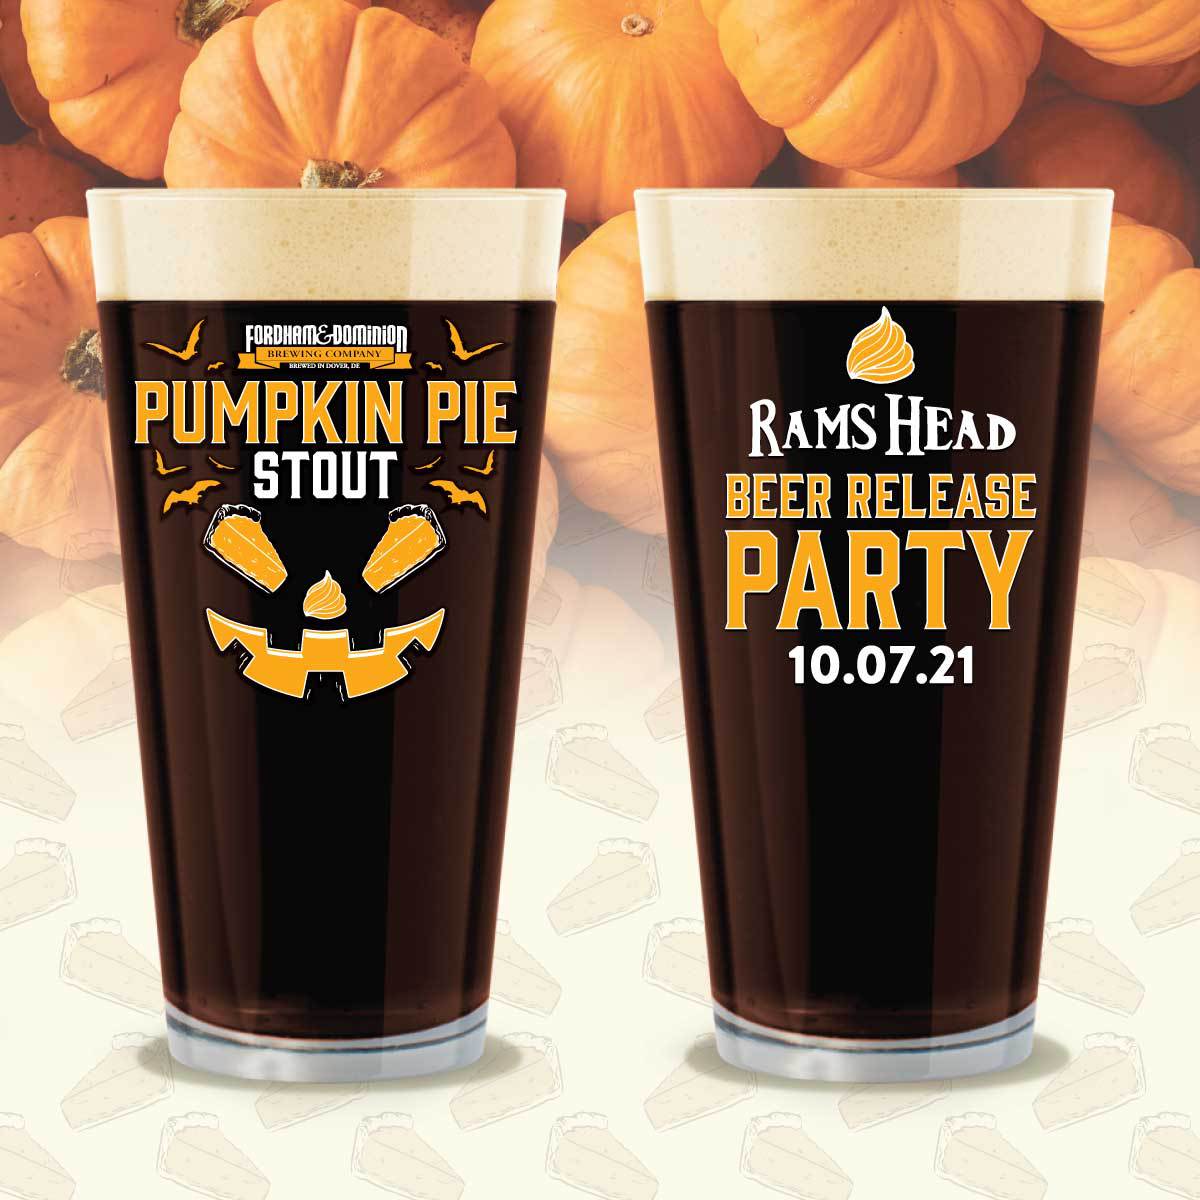 Pumpkin Pie Stout Upcoming Beer Release at Rams Head